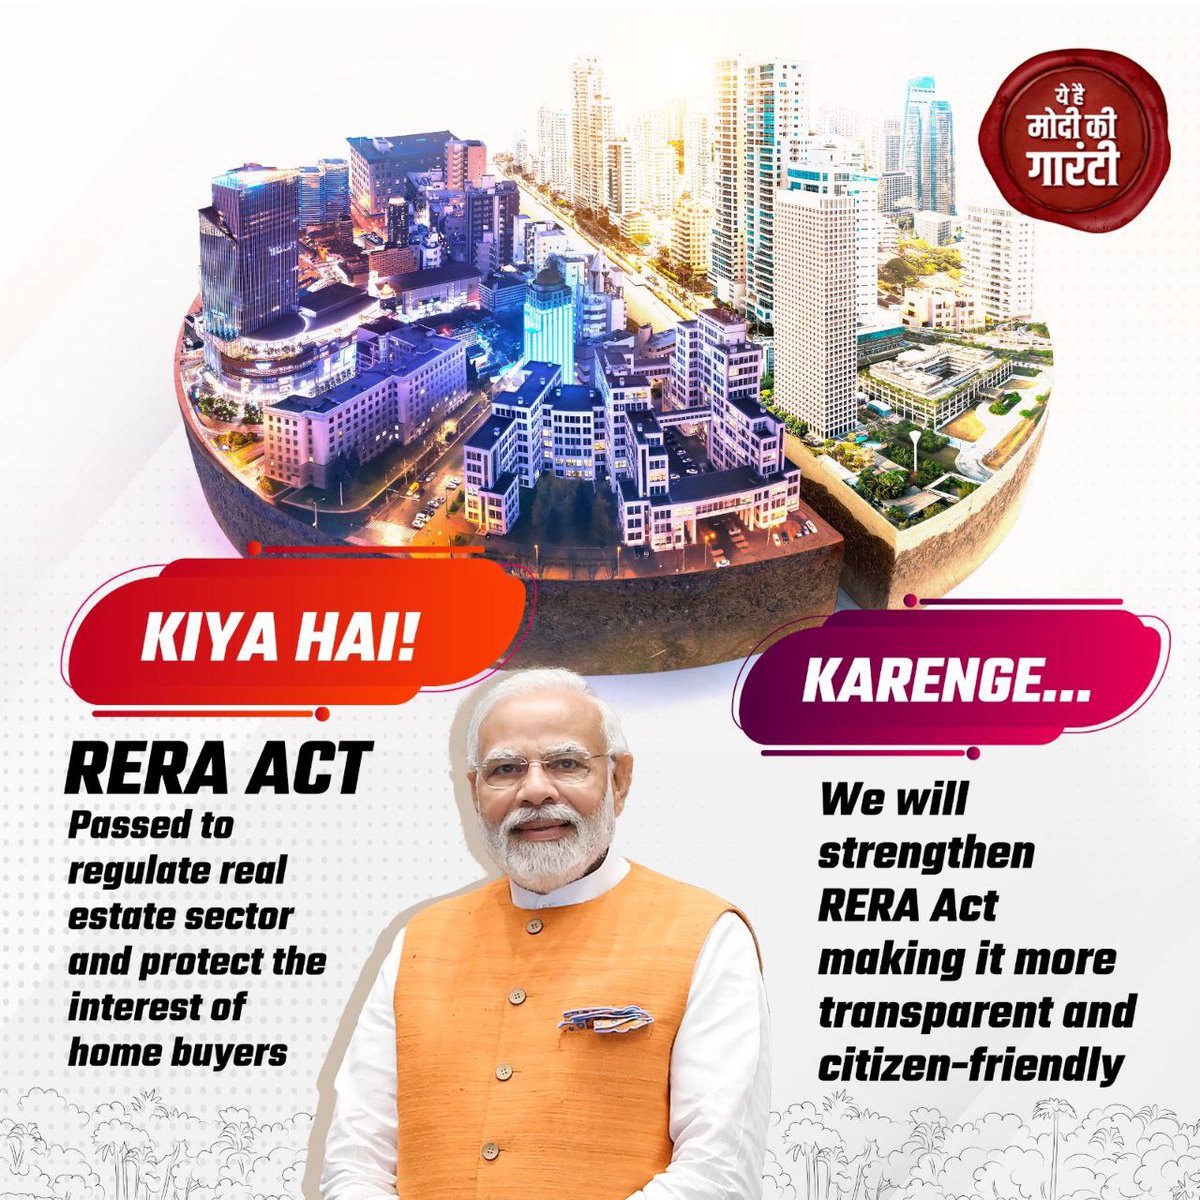 This is #ModiKiGuarantee to ensure affordable and accessible #HousingForAll.

#PhirEkBaarModiSarkar